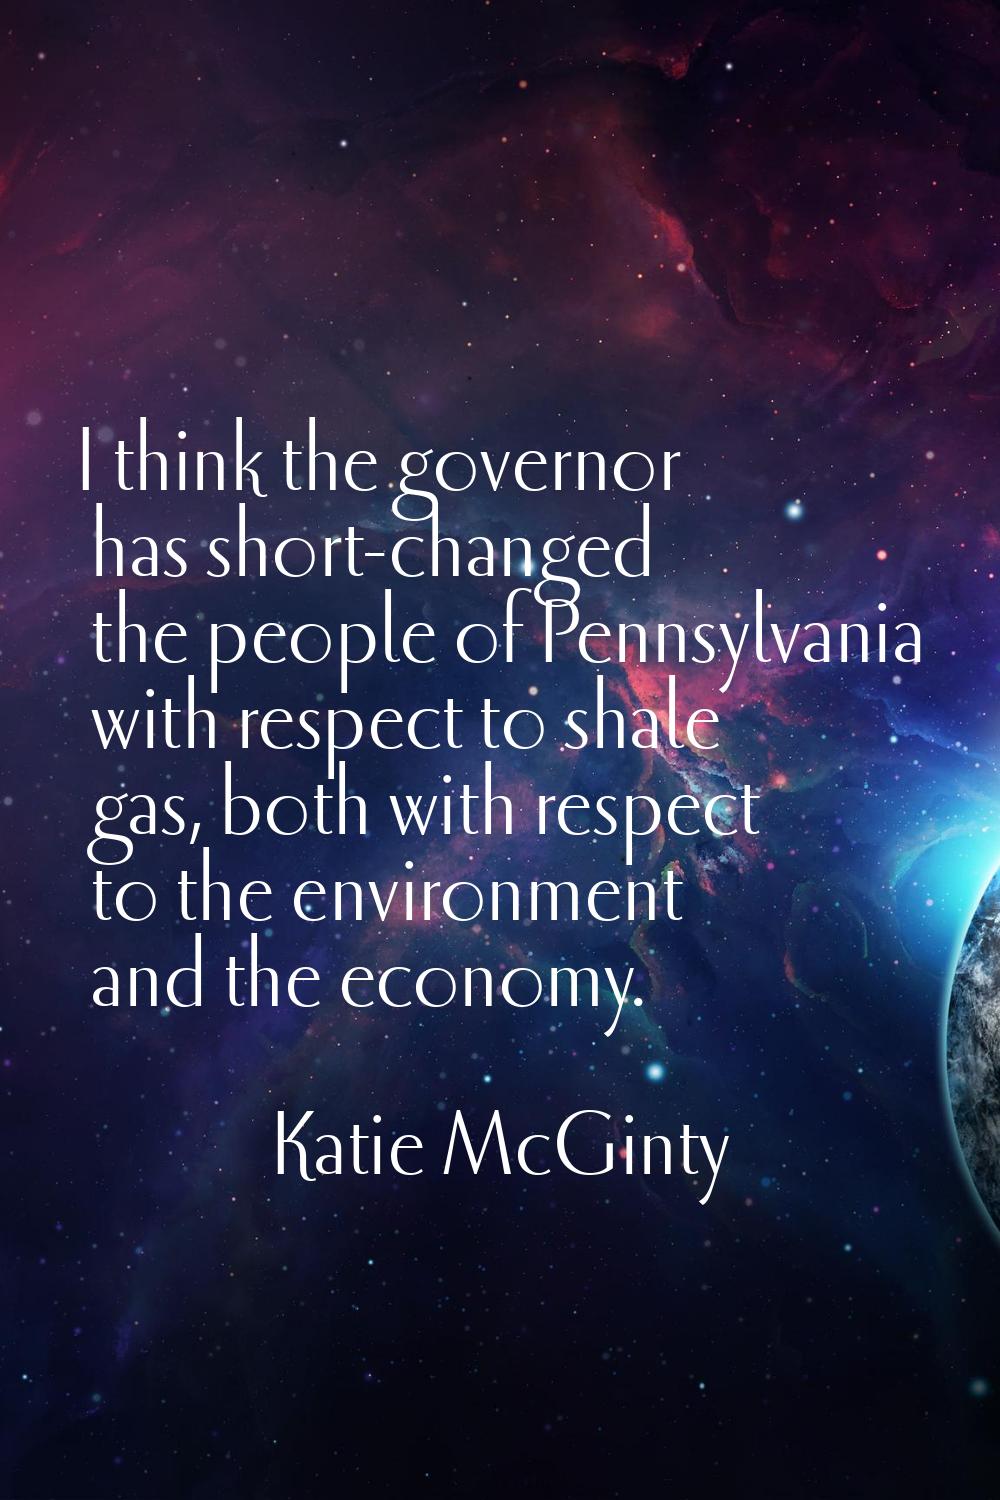 I think the governor has short-changed the people of Pennsylvania with respect to shale gas, both w